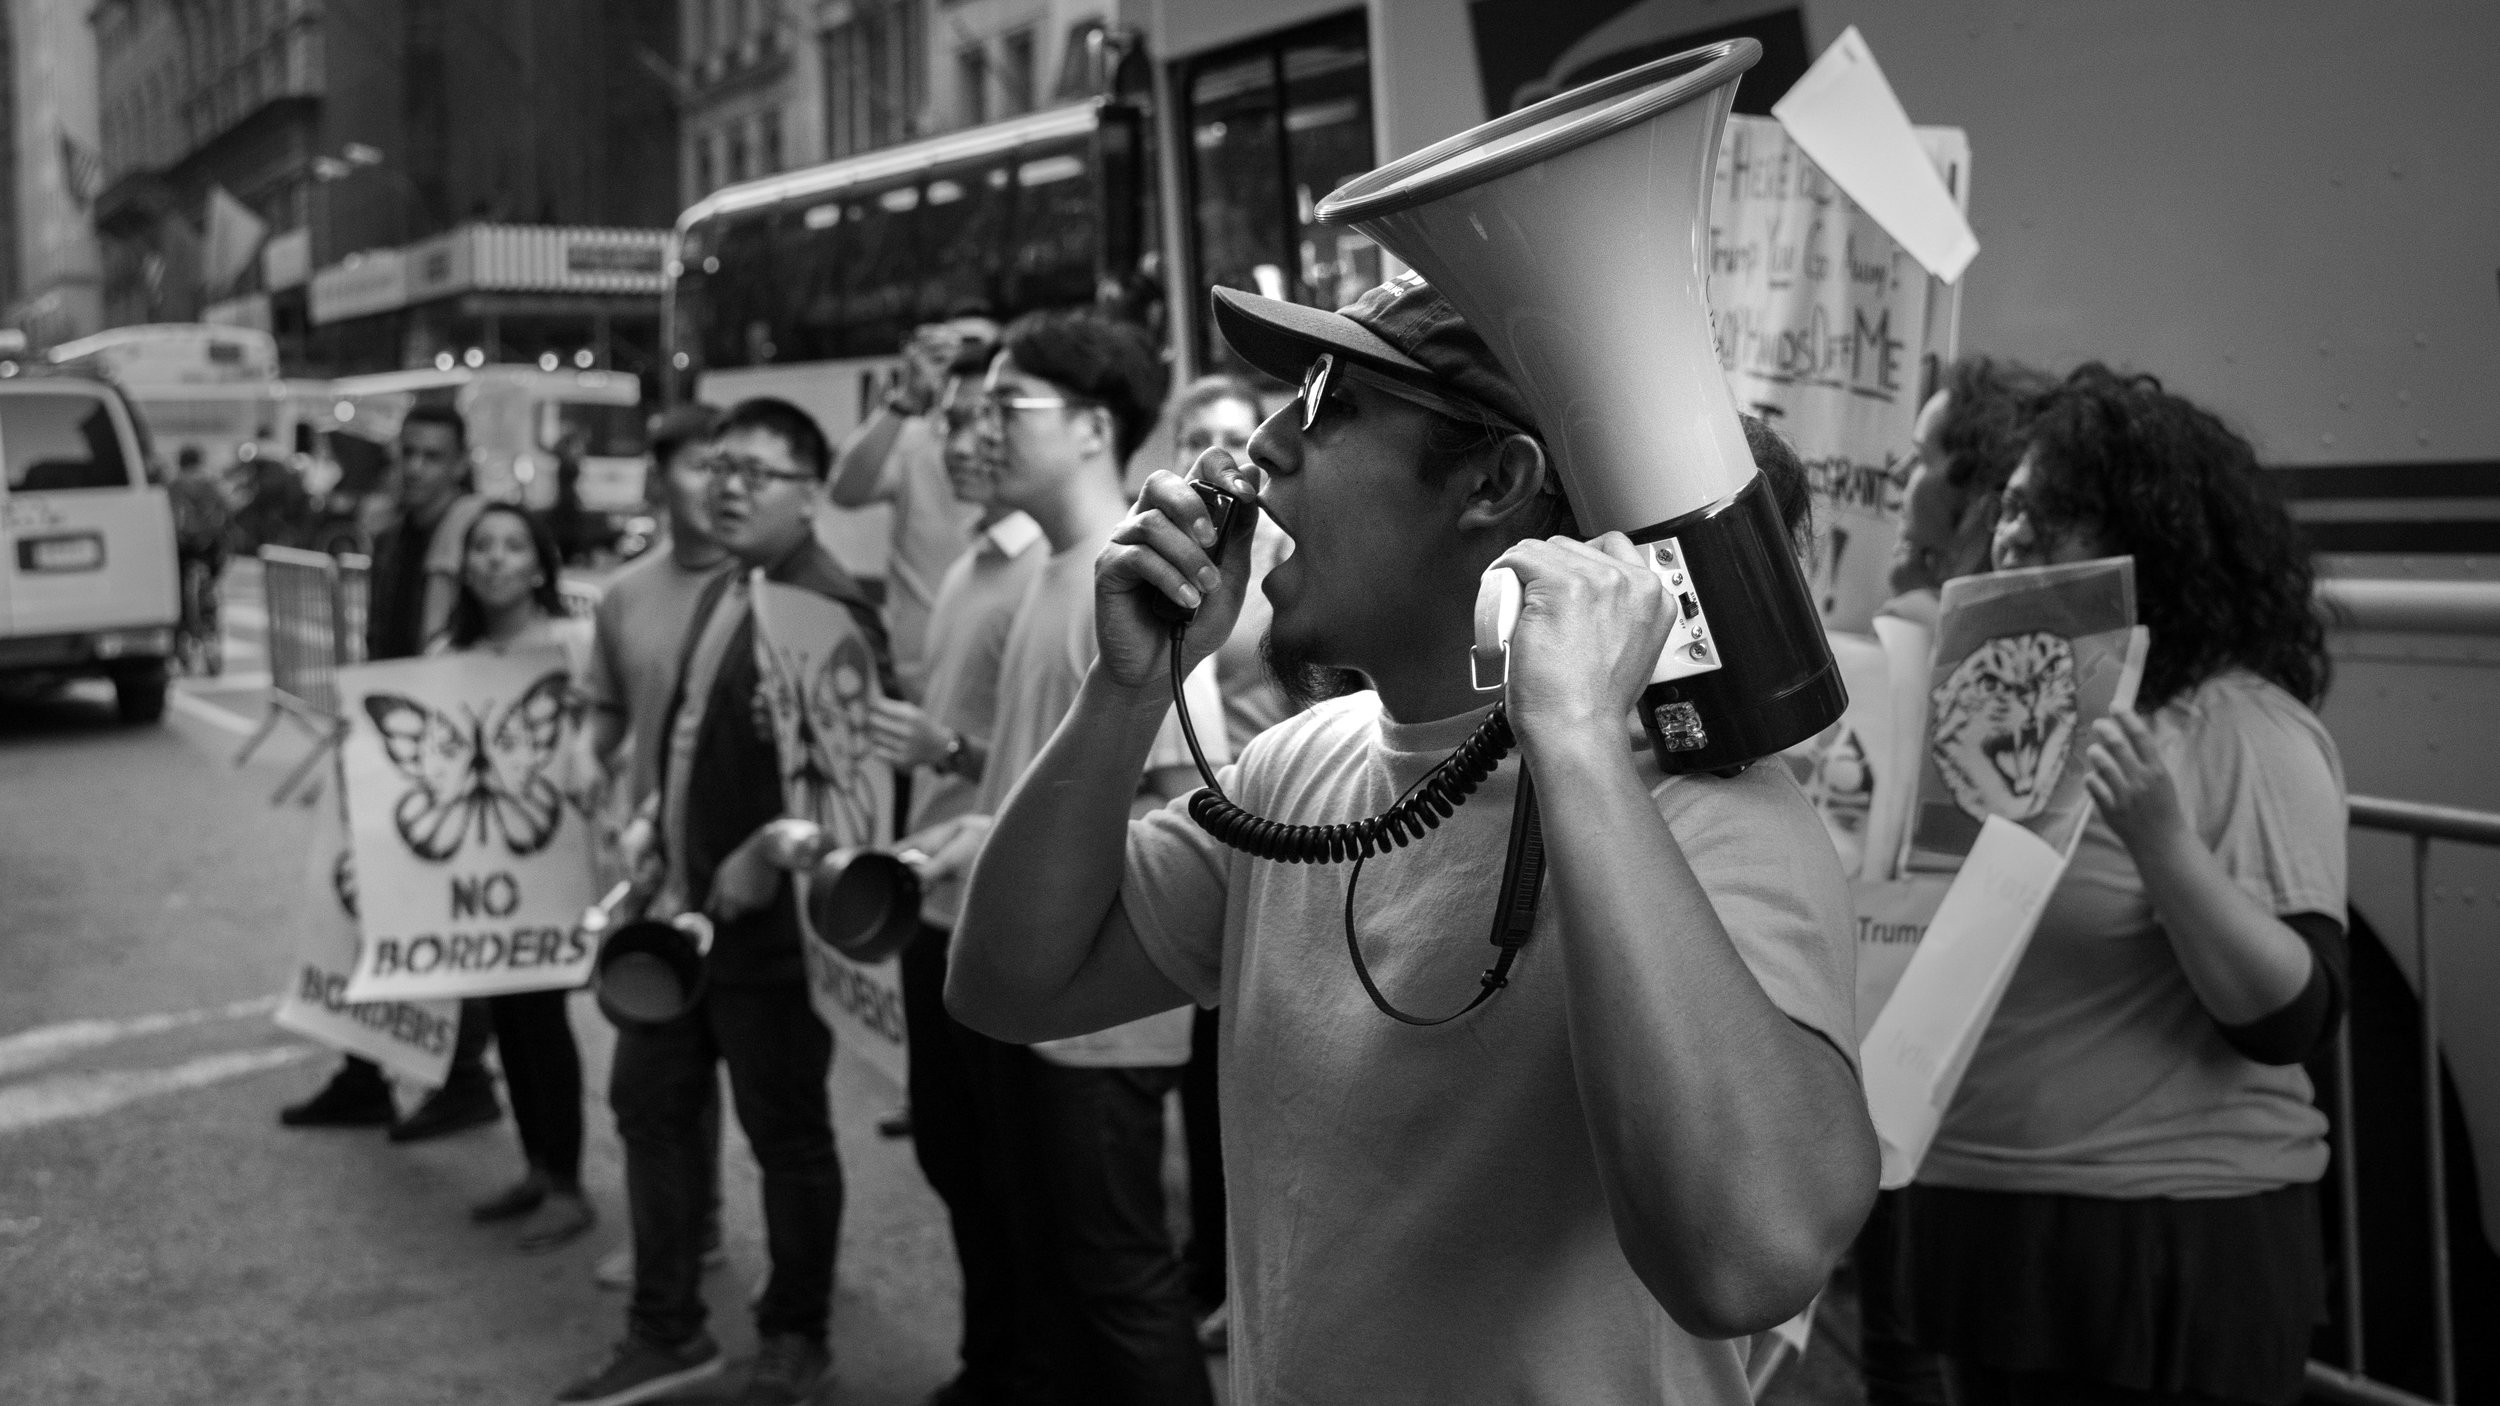  Eric leads a chant during the protest in front of Trump Tower in New York City in October. Protests like these give a voice to those who might not normally speak up. These kind of protests have become especially relevant as the Trump Administration 